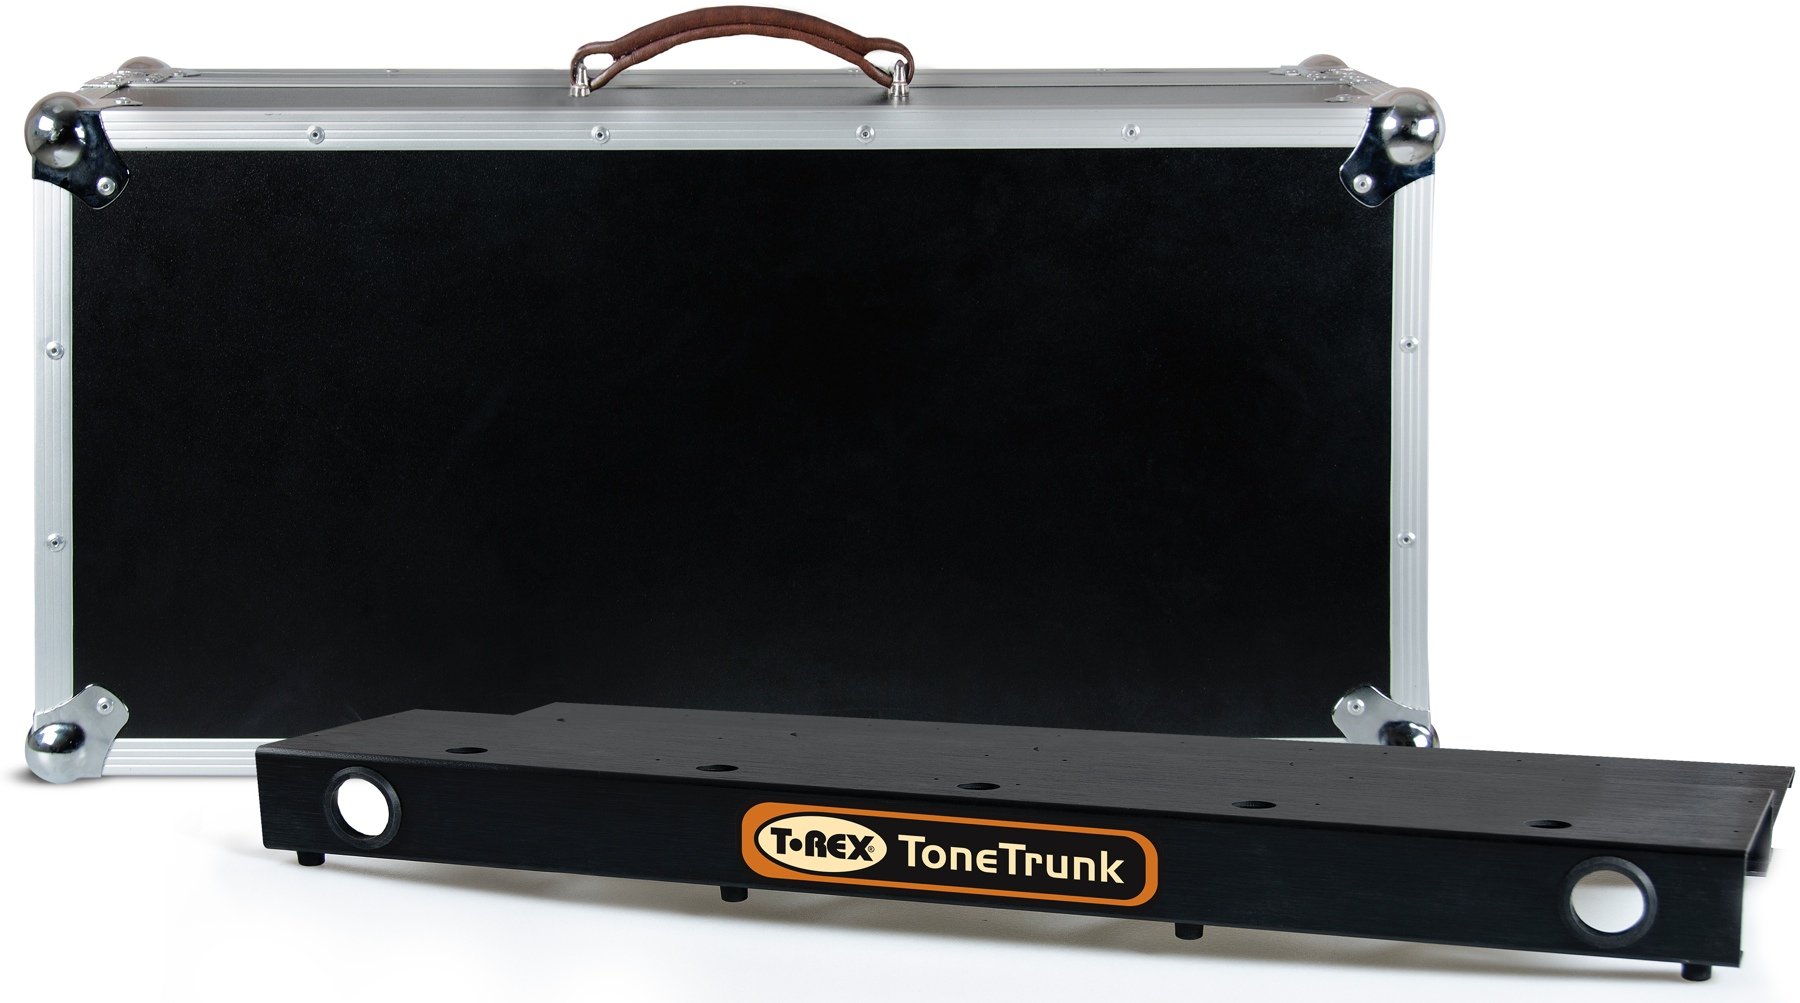 T-REX ToneTrunk Road Case 70 - 27.5"x12.4" Pedalboard with Hard Case 10285 - The Guitar World